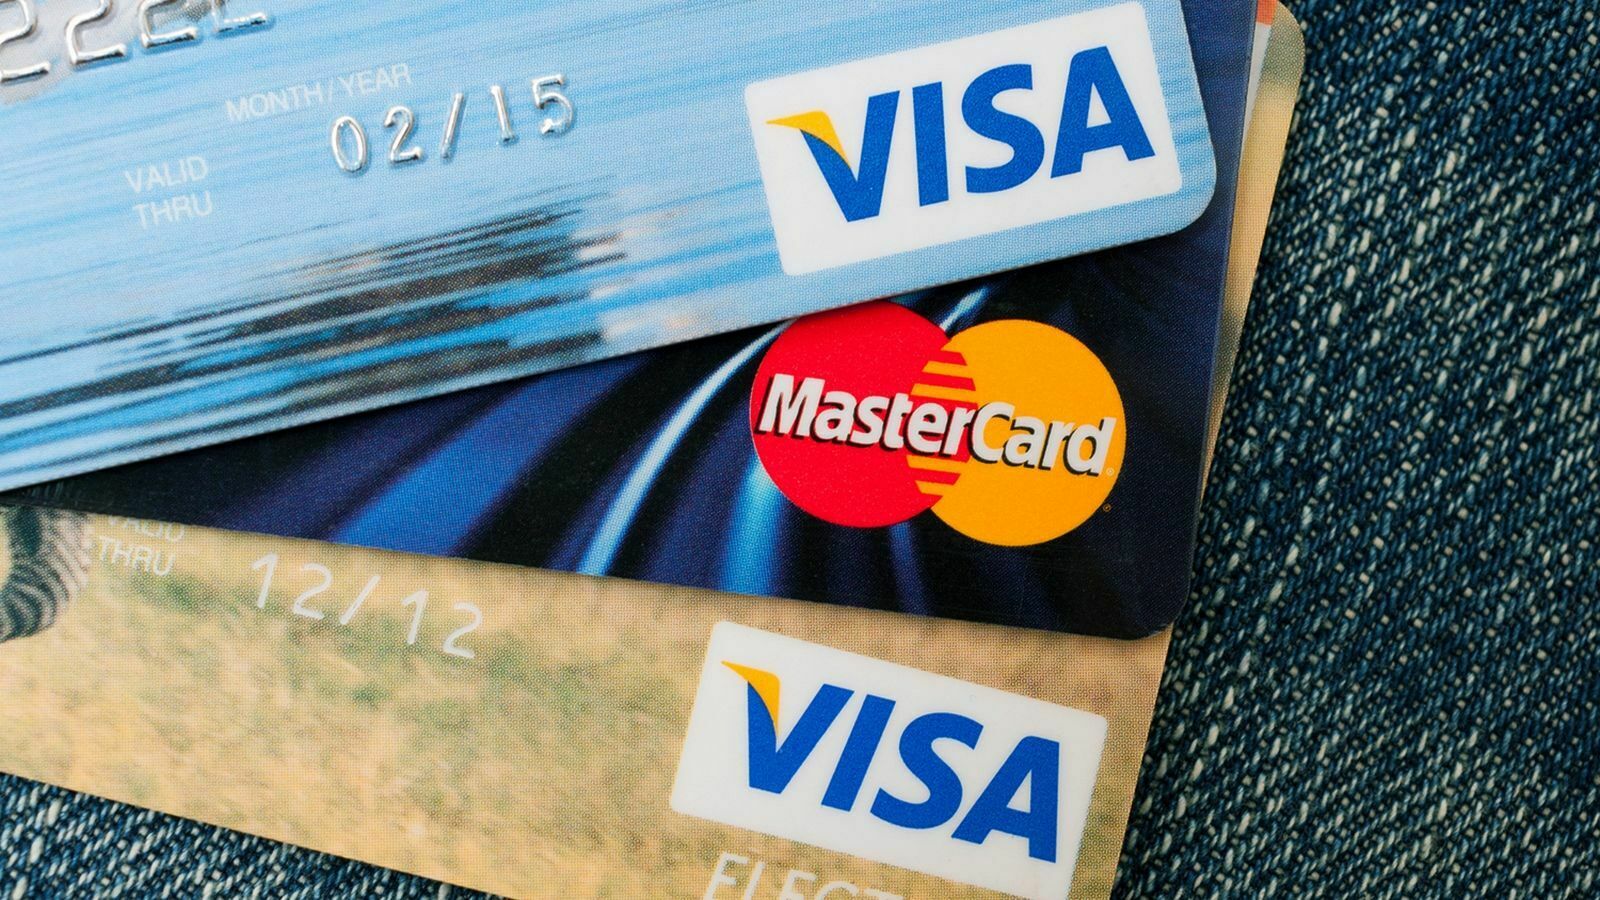 From October 1, child benefits cannot be received on Mastercard and Visa cards